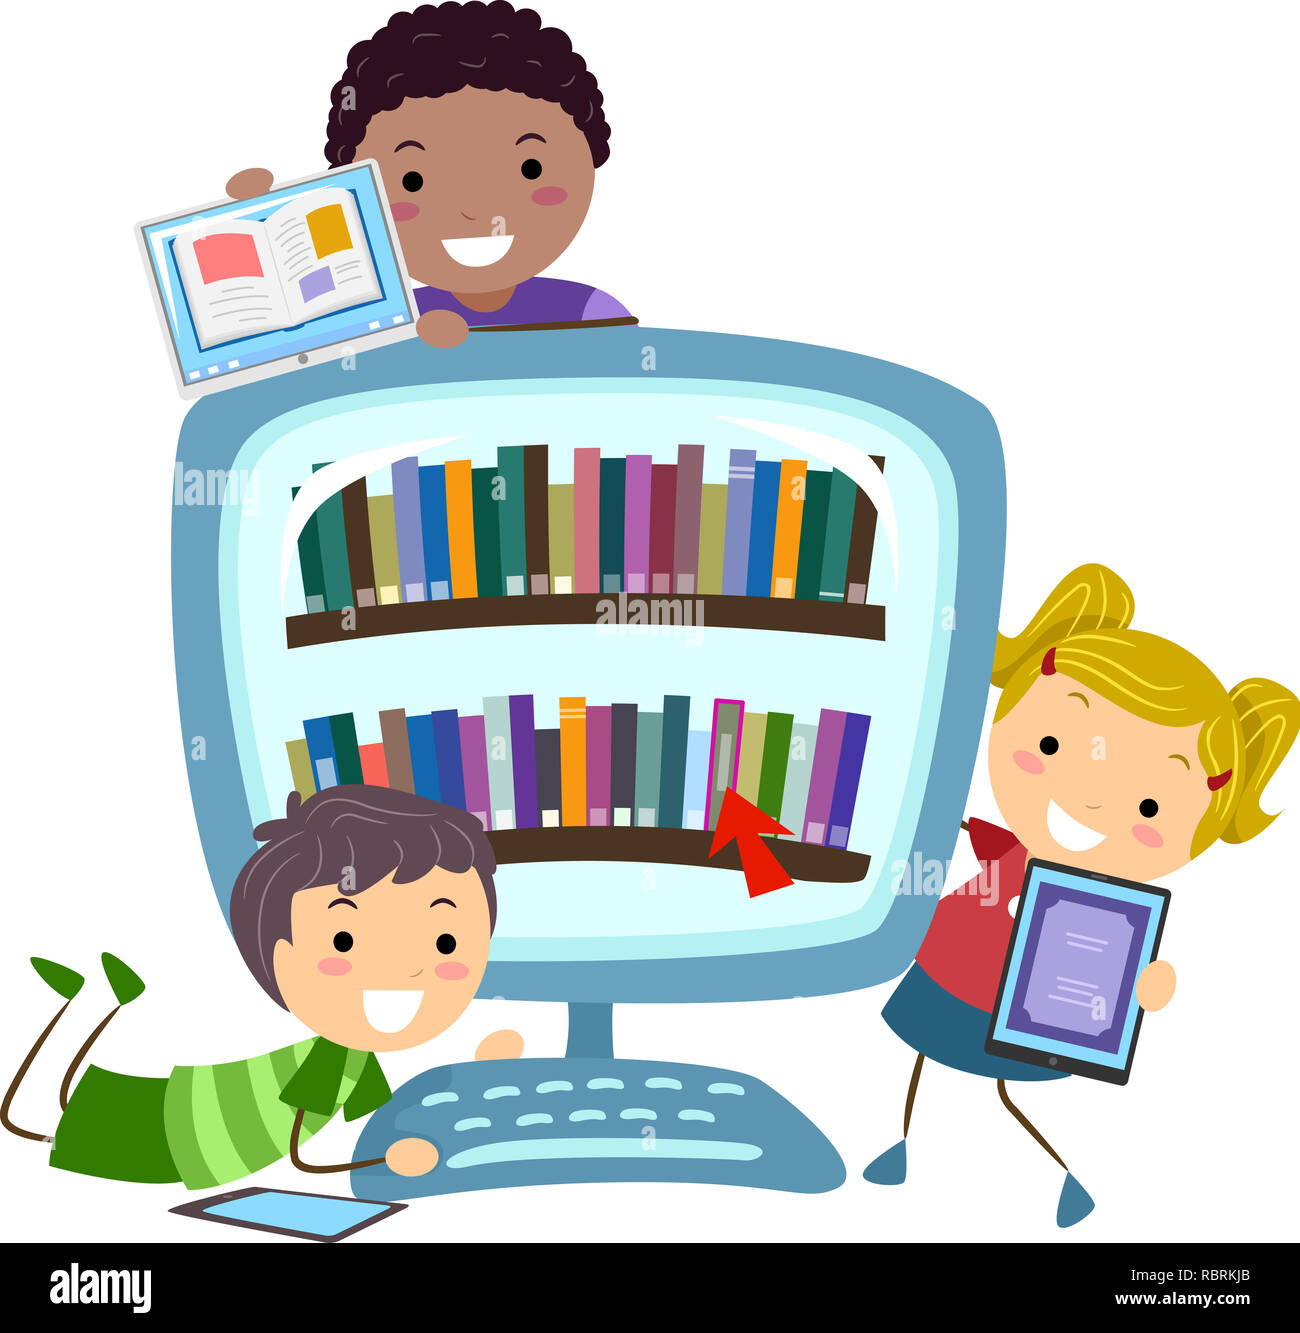 Illustration of Stickman Kids with Tablet Computers and a Computer Full of Digital Books Stock Photo